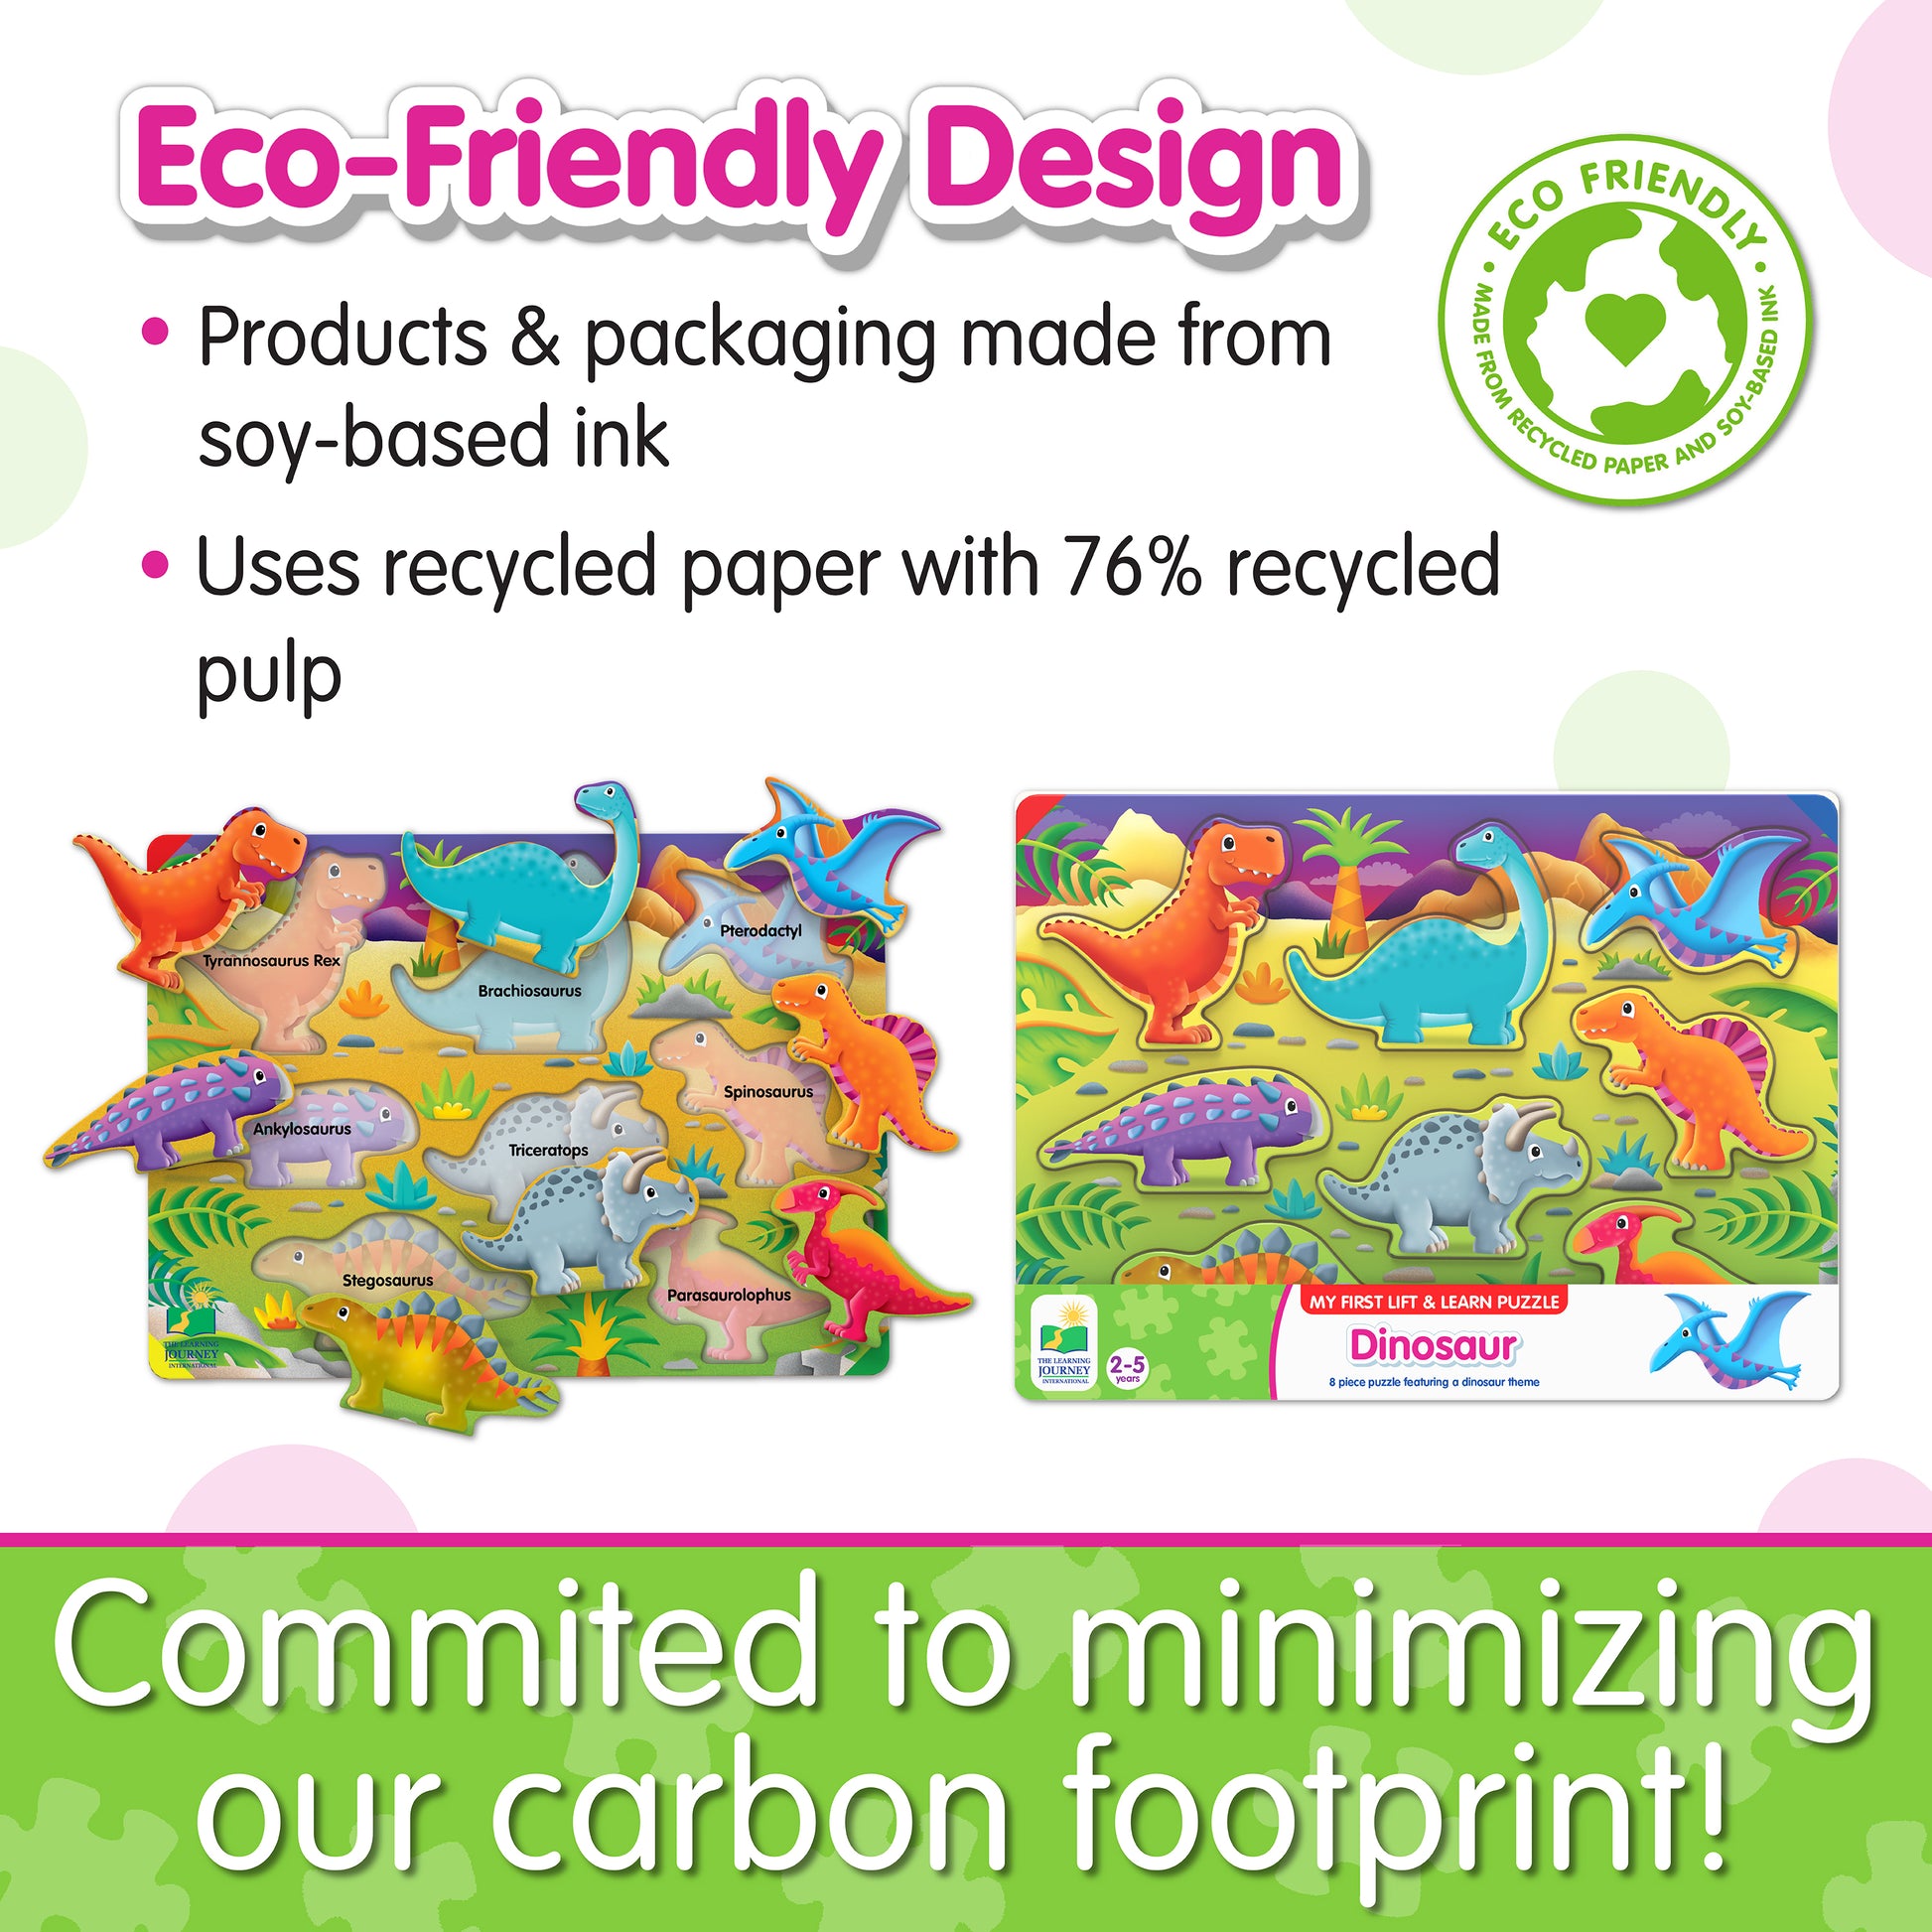 Infographic about My First Lift and Learn Dinosaur Puzzle's eco-friendly design that says, "Committed to minimizing our carbon footprint!"